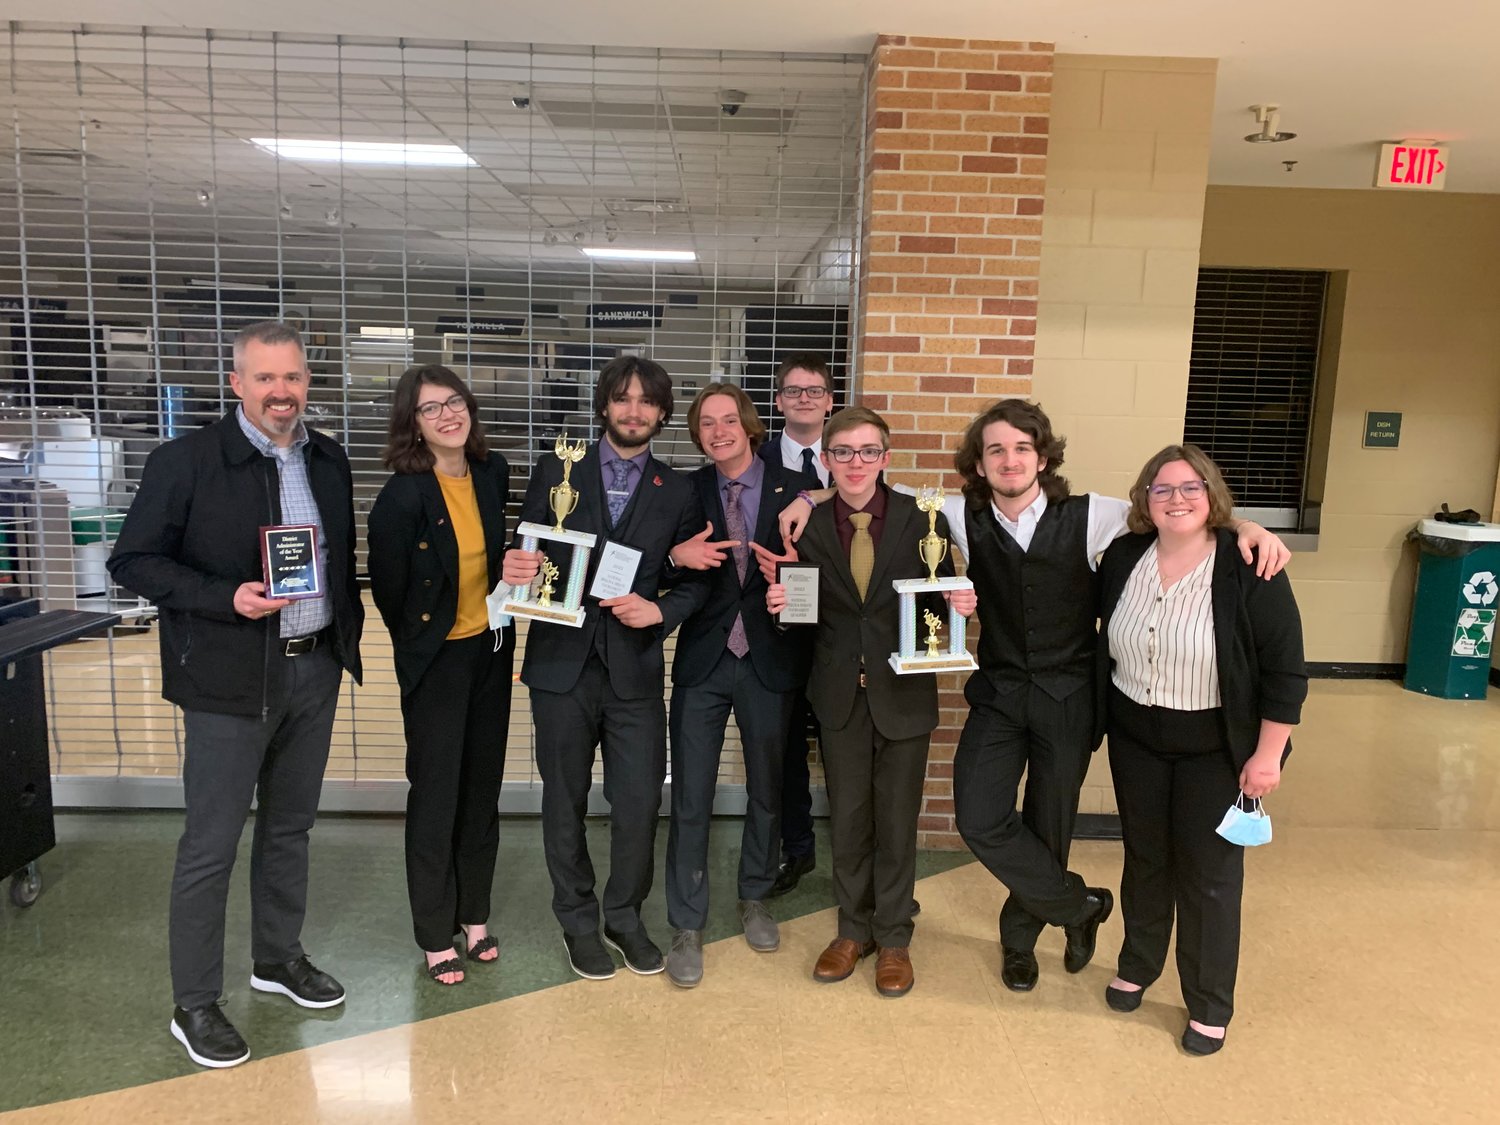 Pictured are, from left to right, BHS Principal David Geurin, Admin of the Year for the Ozark NSDA District, Avery Roweton (world schools qualifier), Jesse Fields (Congress), Sol Manis (Lincoln Douglas debate), Jacob Morgan (in the back, Congress), Jackson Cornell (Congress), Ben Gann (Lincoln Douglas), Paige Severns (informative speaking).